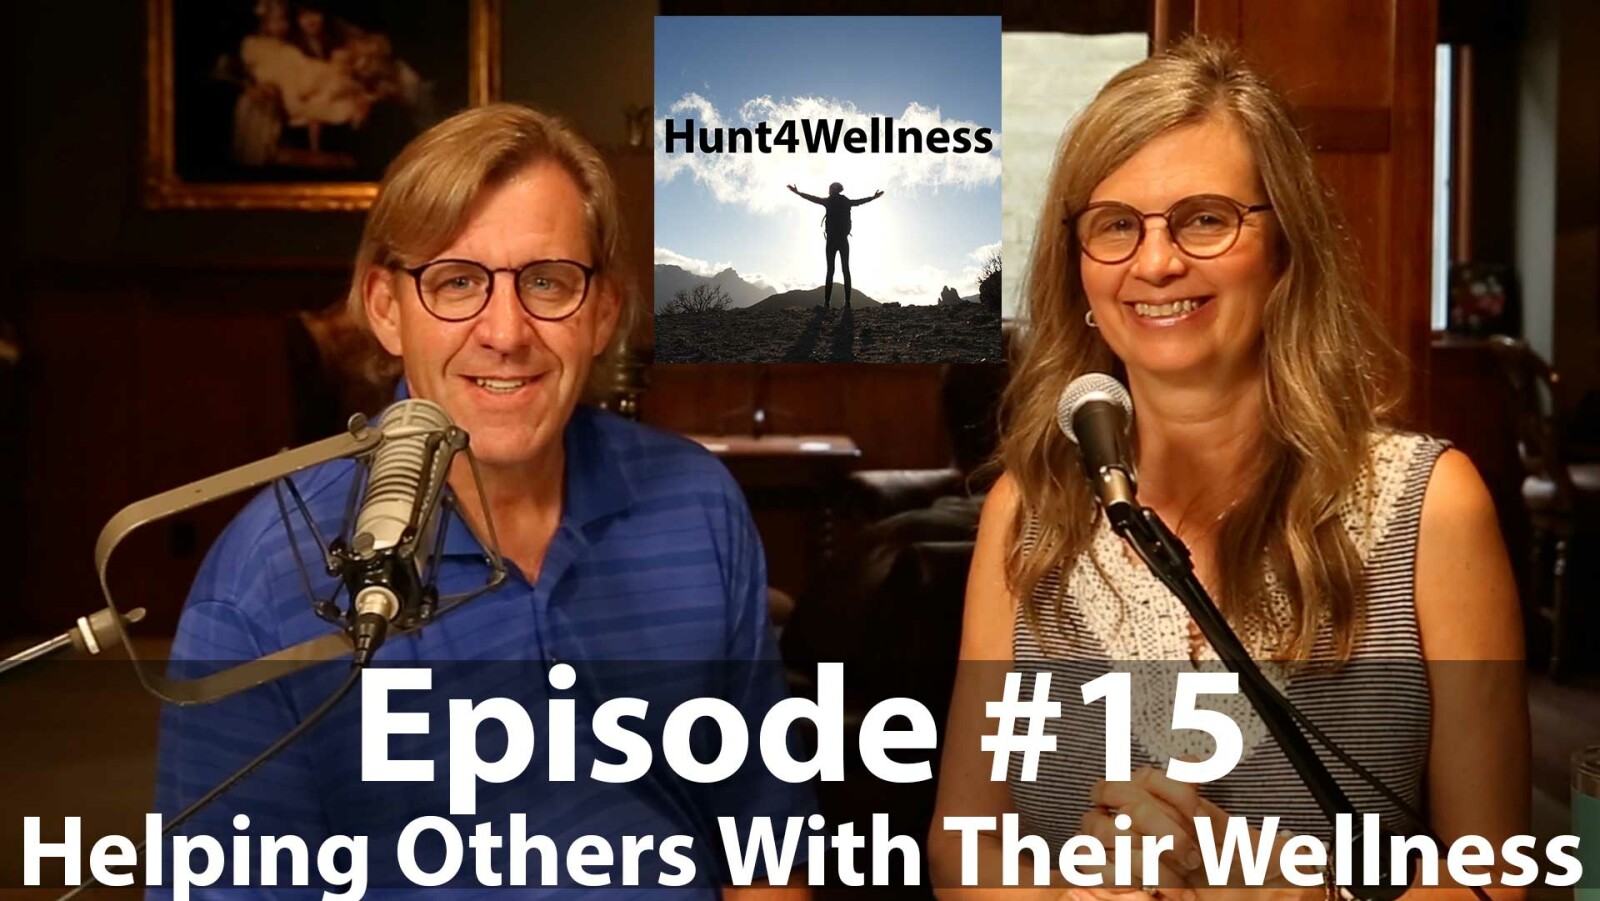 Episode #15 - Helping Others With Their Wellness